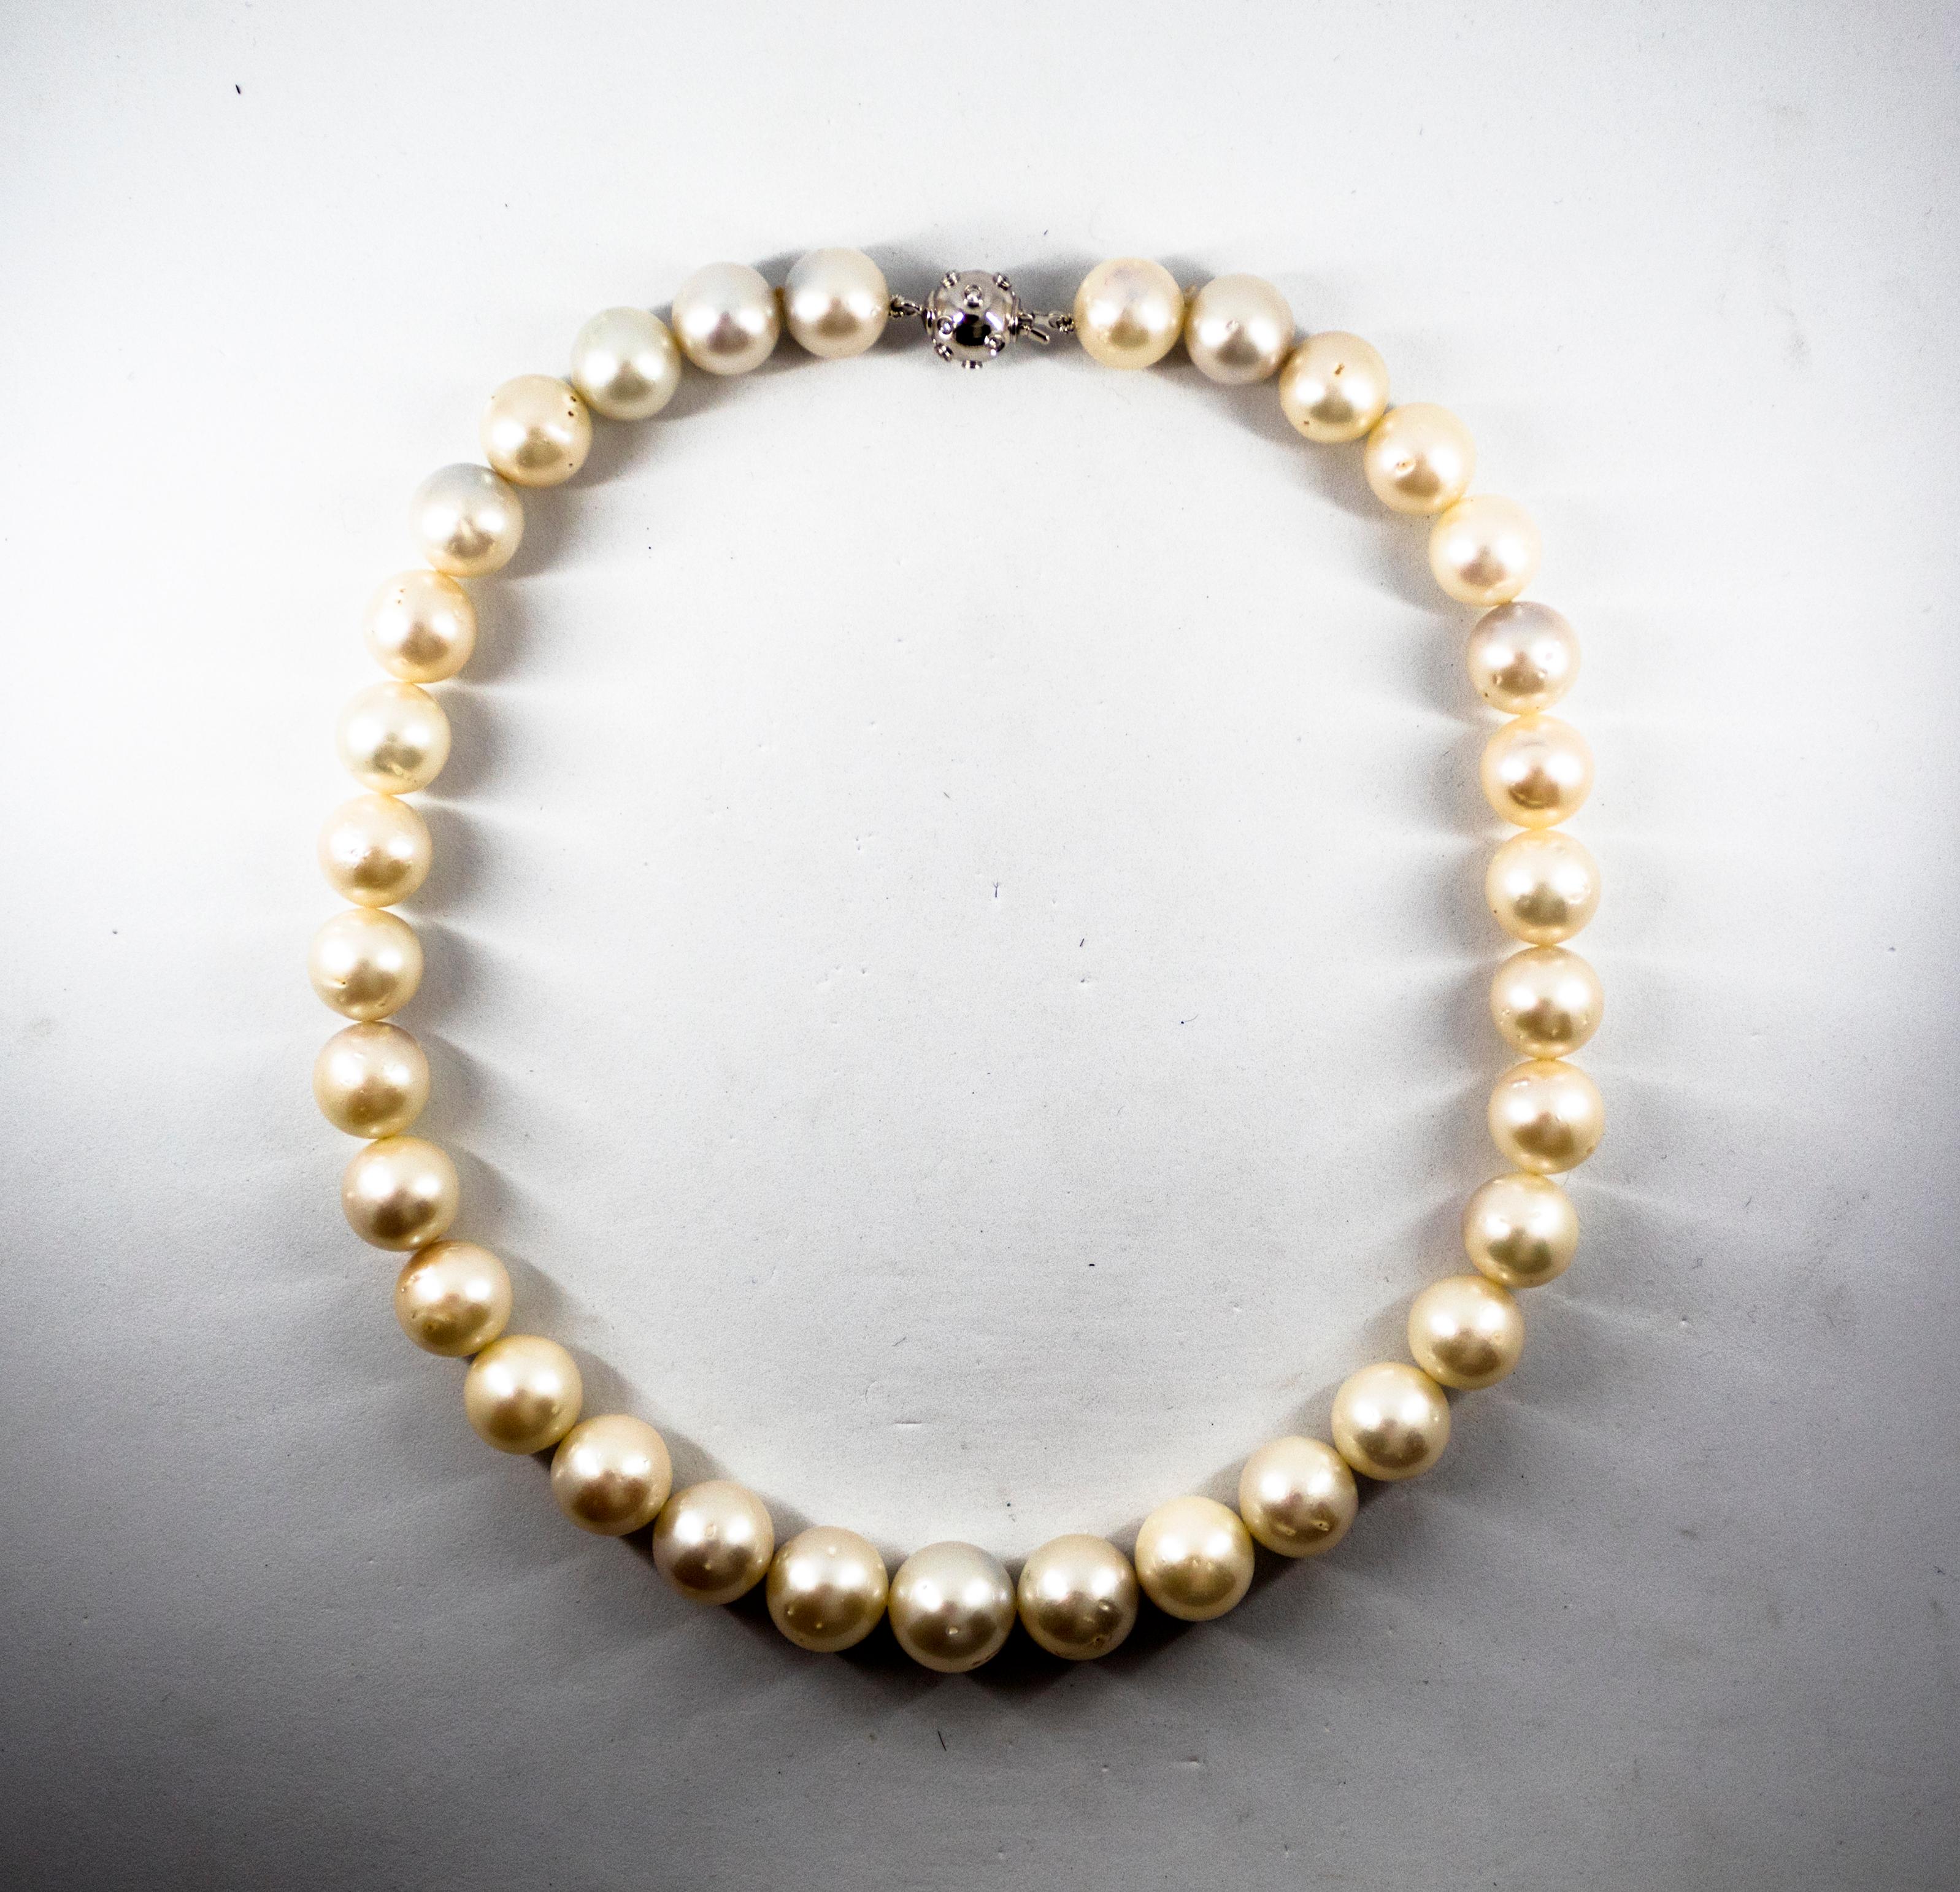 This Necklace is made of 18K White Gold.
This Necklace has 0.28 Carats of White Diamonds.
This Necklace has 510.00 Carats of Australian Pearls.
The Diameter of the Pearls goes from 12.20mm to 14.60mm.
We're a workshop so every piece is handmade,